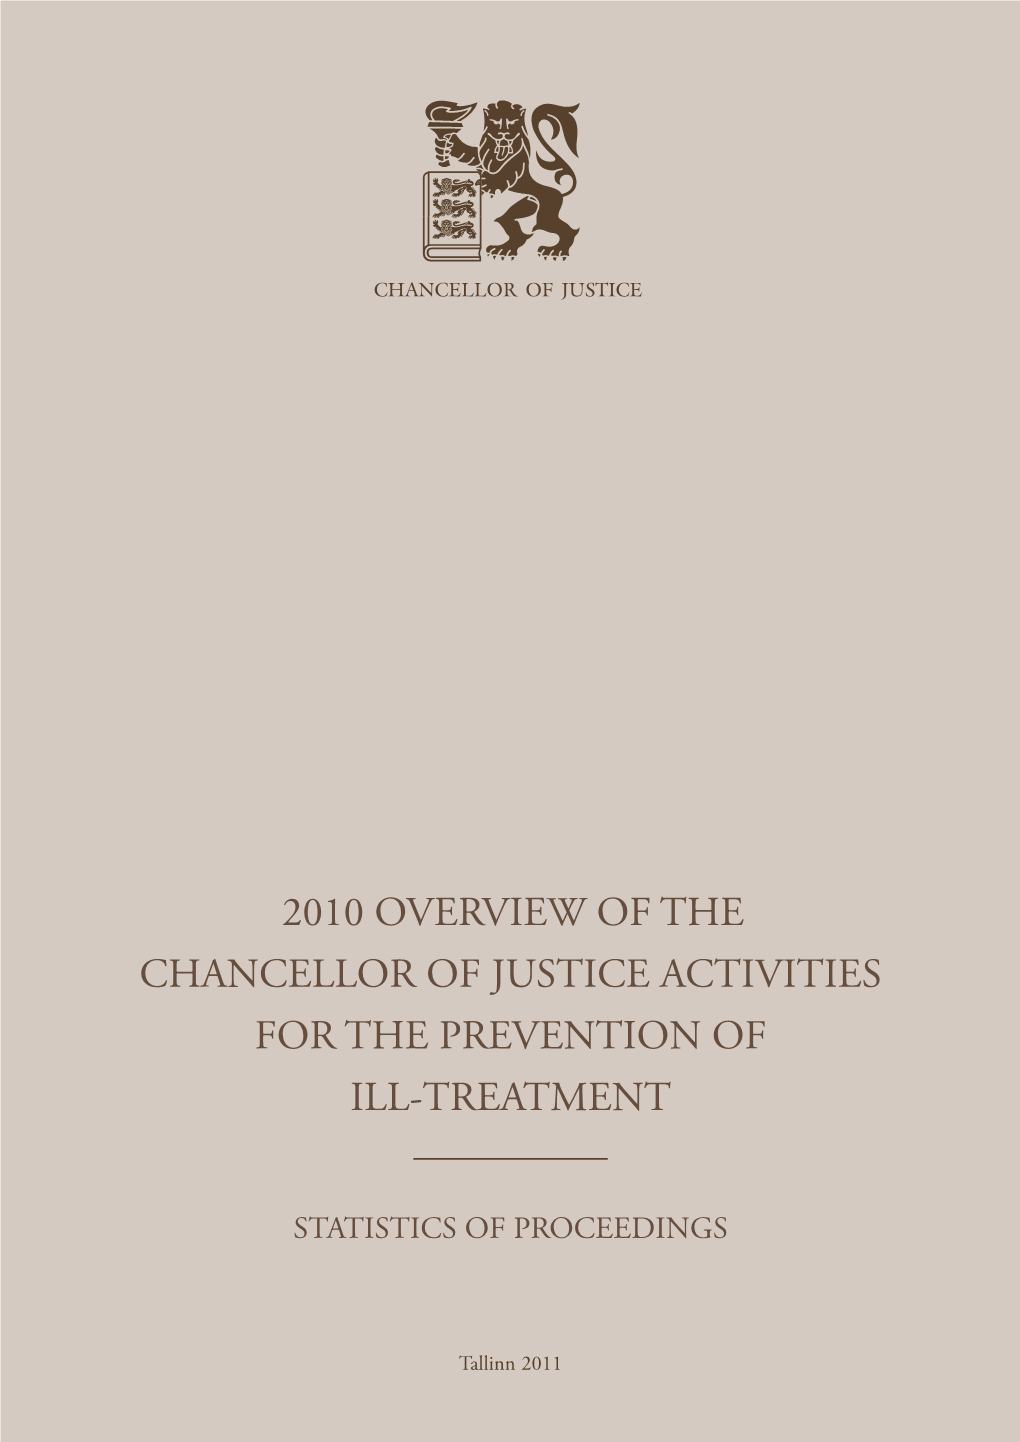 2010 Overview of the Chancellor of Justice Activities for the Prevention of Ill-Treatment